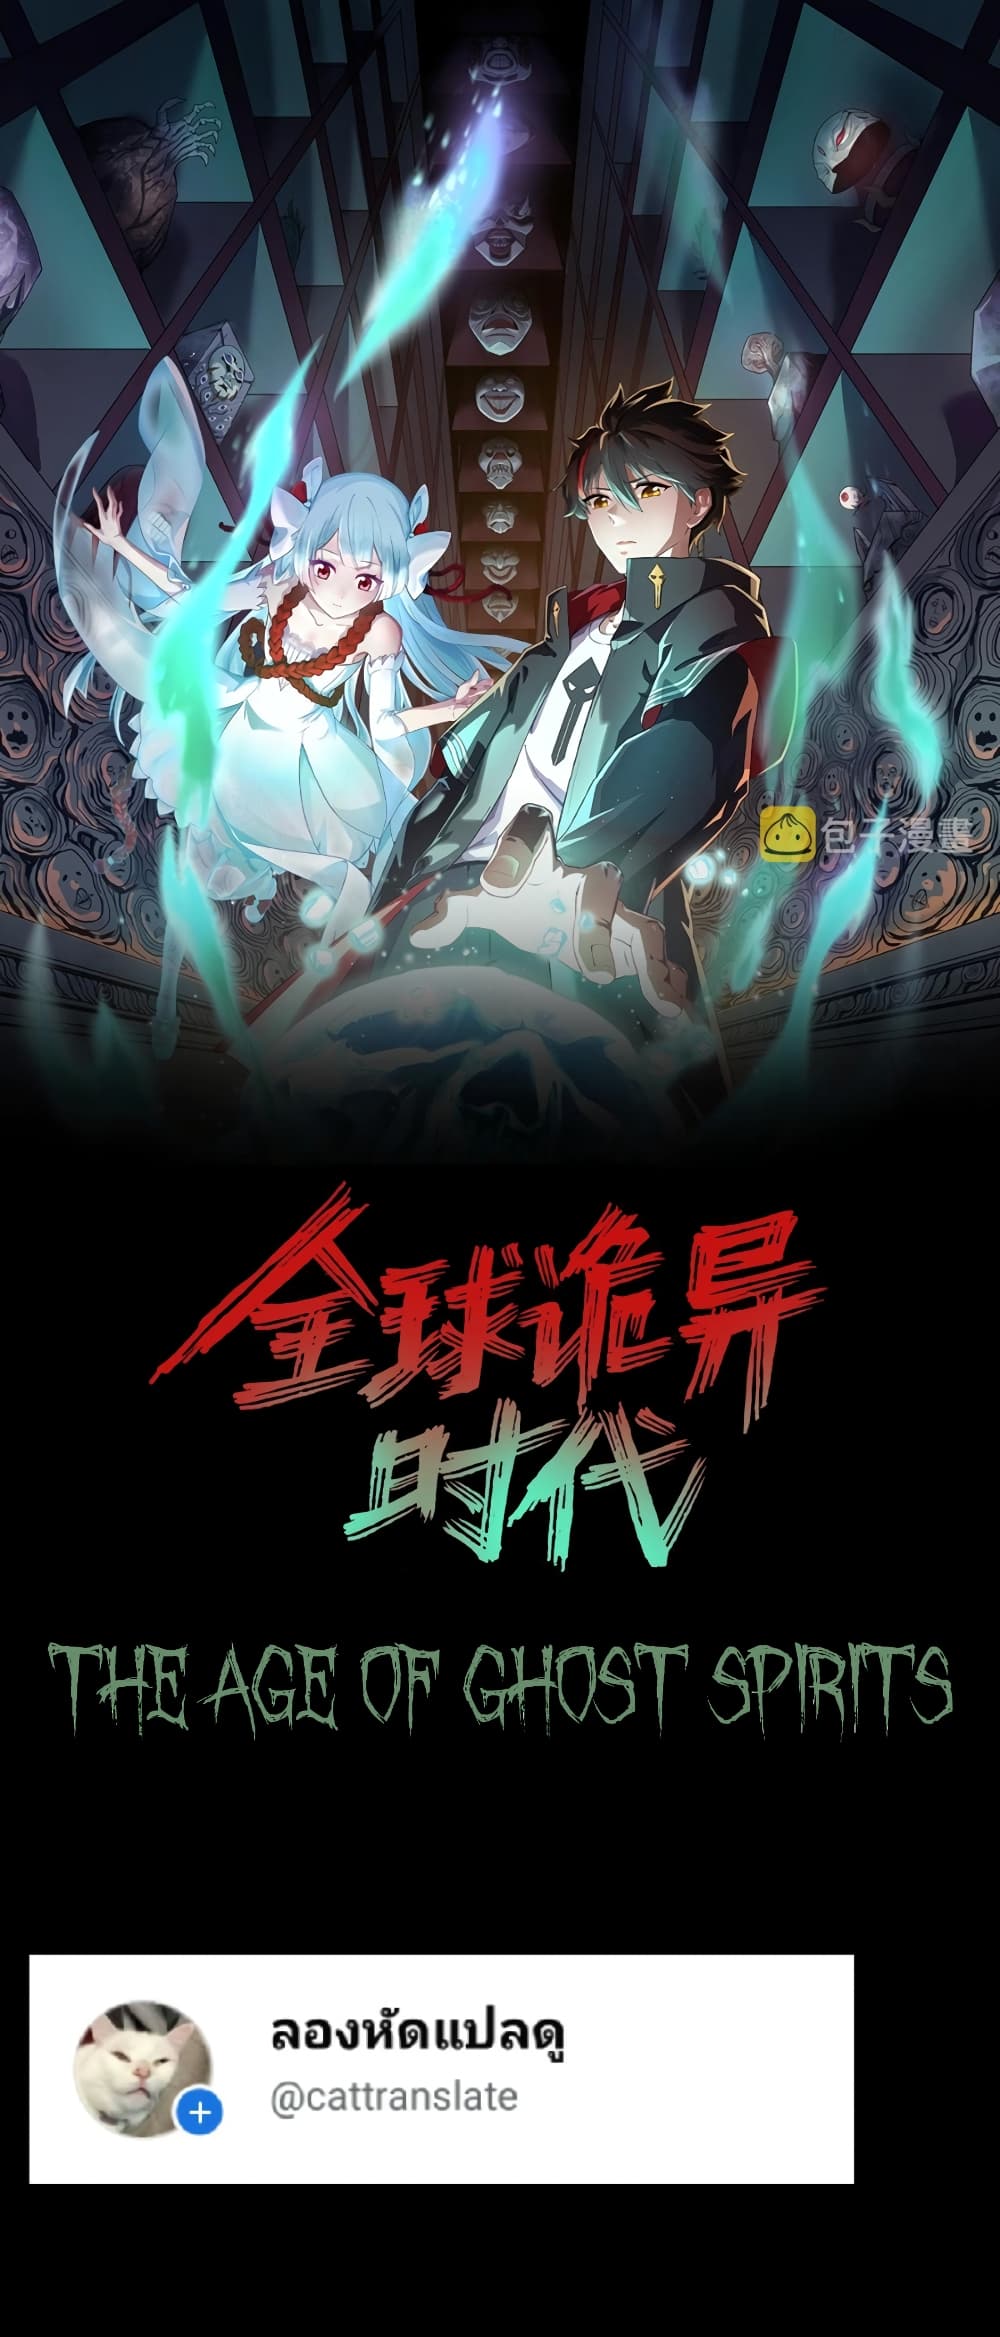 The Age of Ghost Spirits à¸à¸­à¸à¸à¸µà¹ 24 (1)